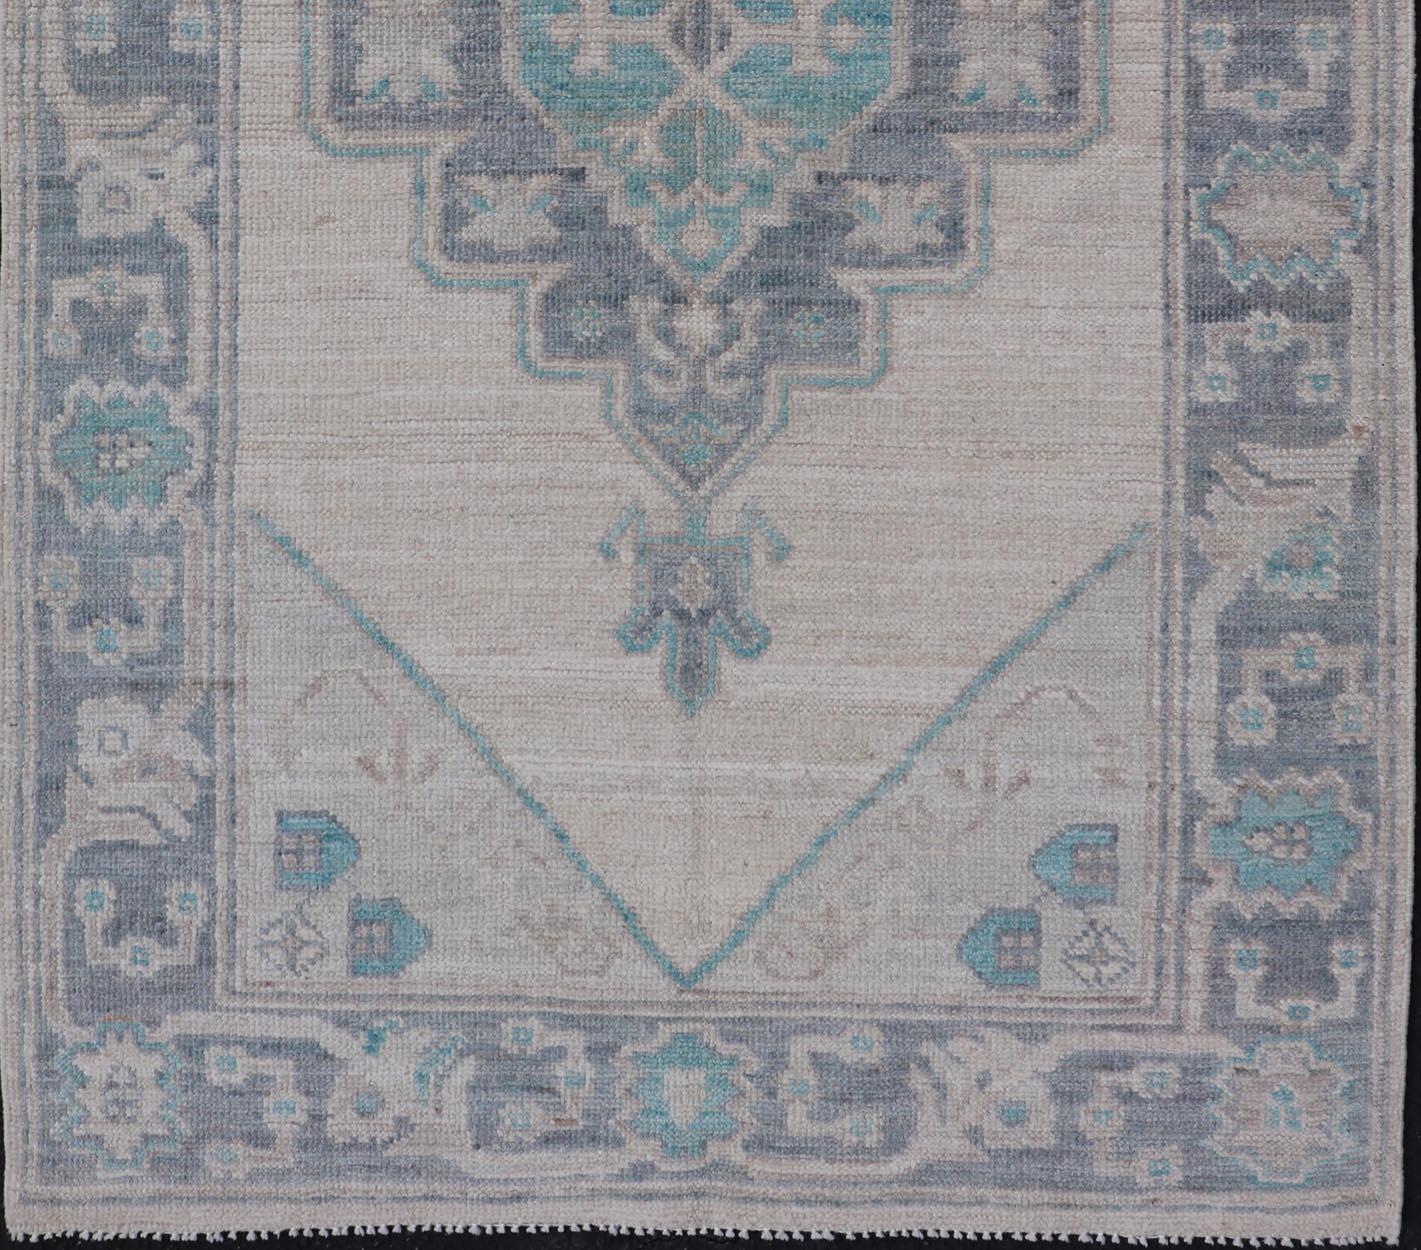  Modern Oushak with Off White Background with A Large Tribal Medallion in Teal.

Measures: 3'1 x 5'3 

This Oushak featuring a center tribal medallion in the center of off white background and the light gray border also. Colors are gray, cream, Off